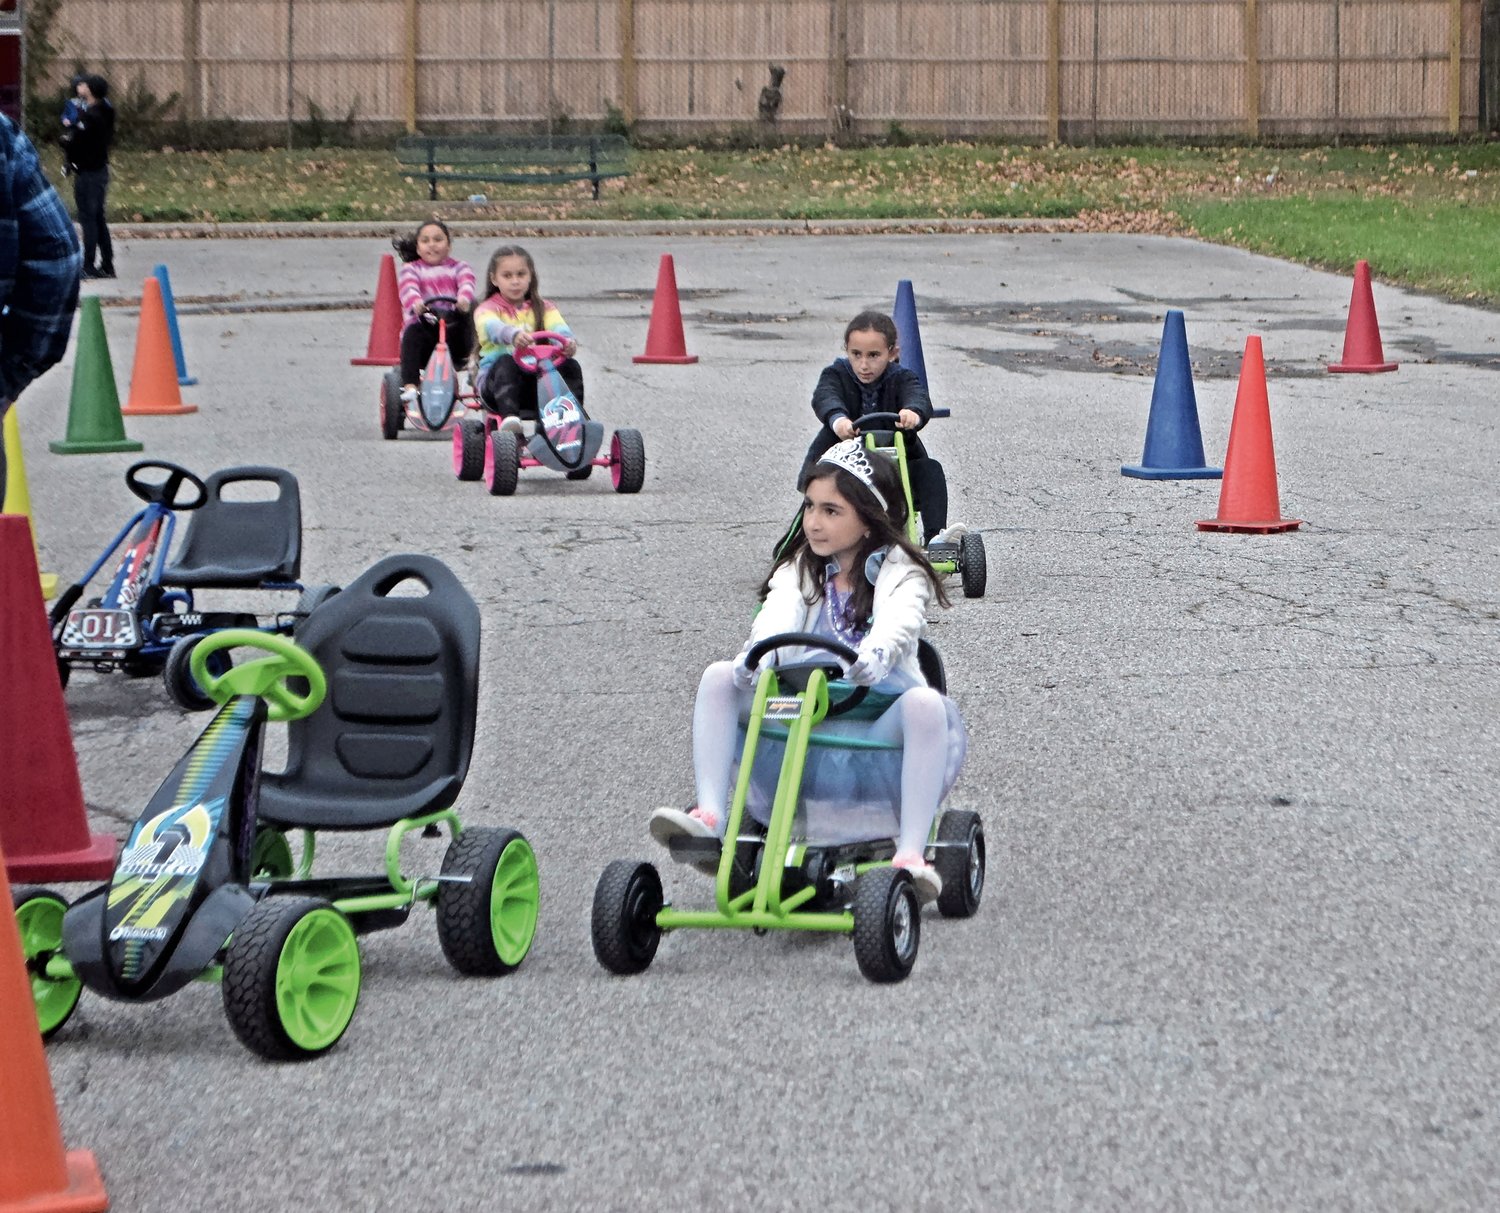 Pedaled-powered go-karts was one of the many attractions at Ogden’s Fall Y’all.